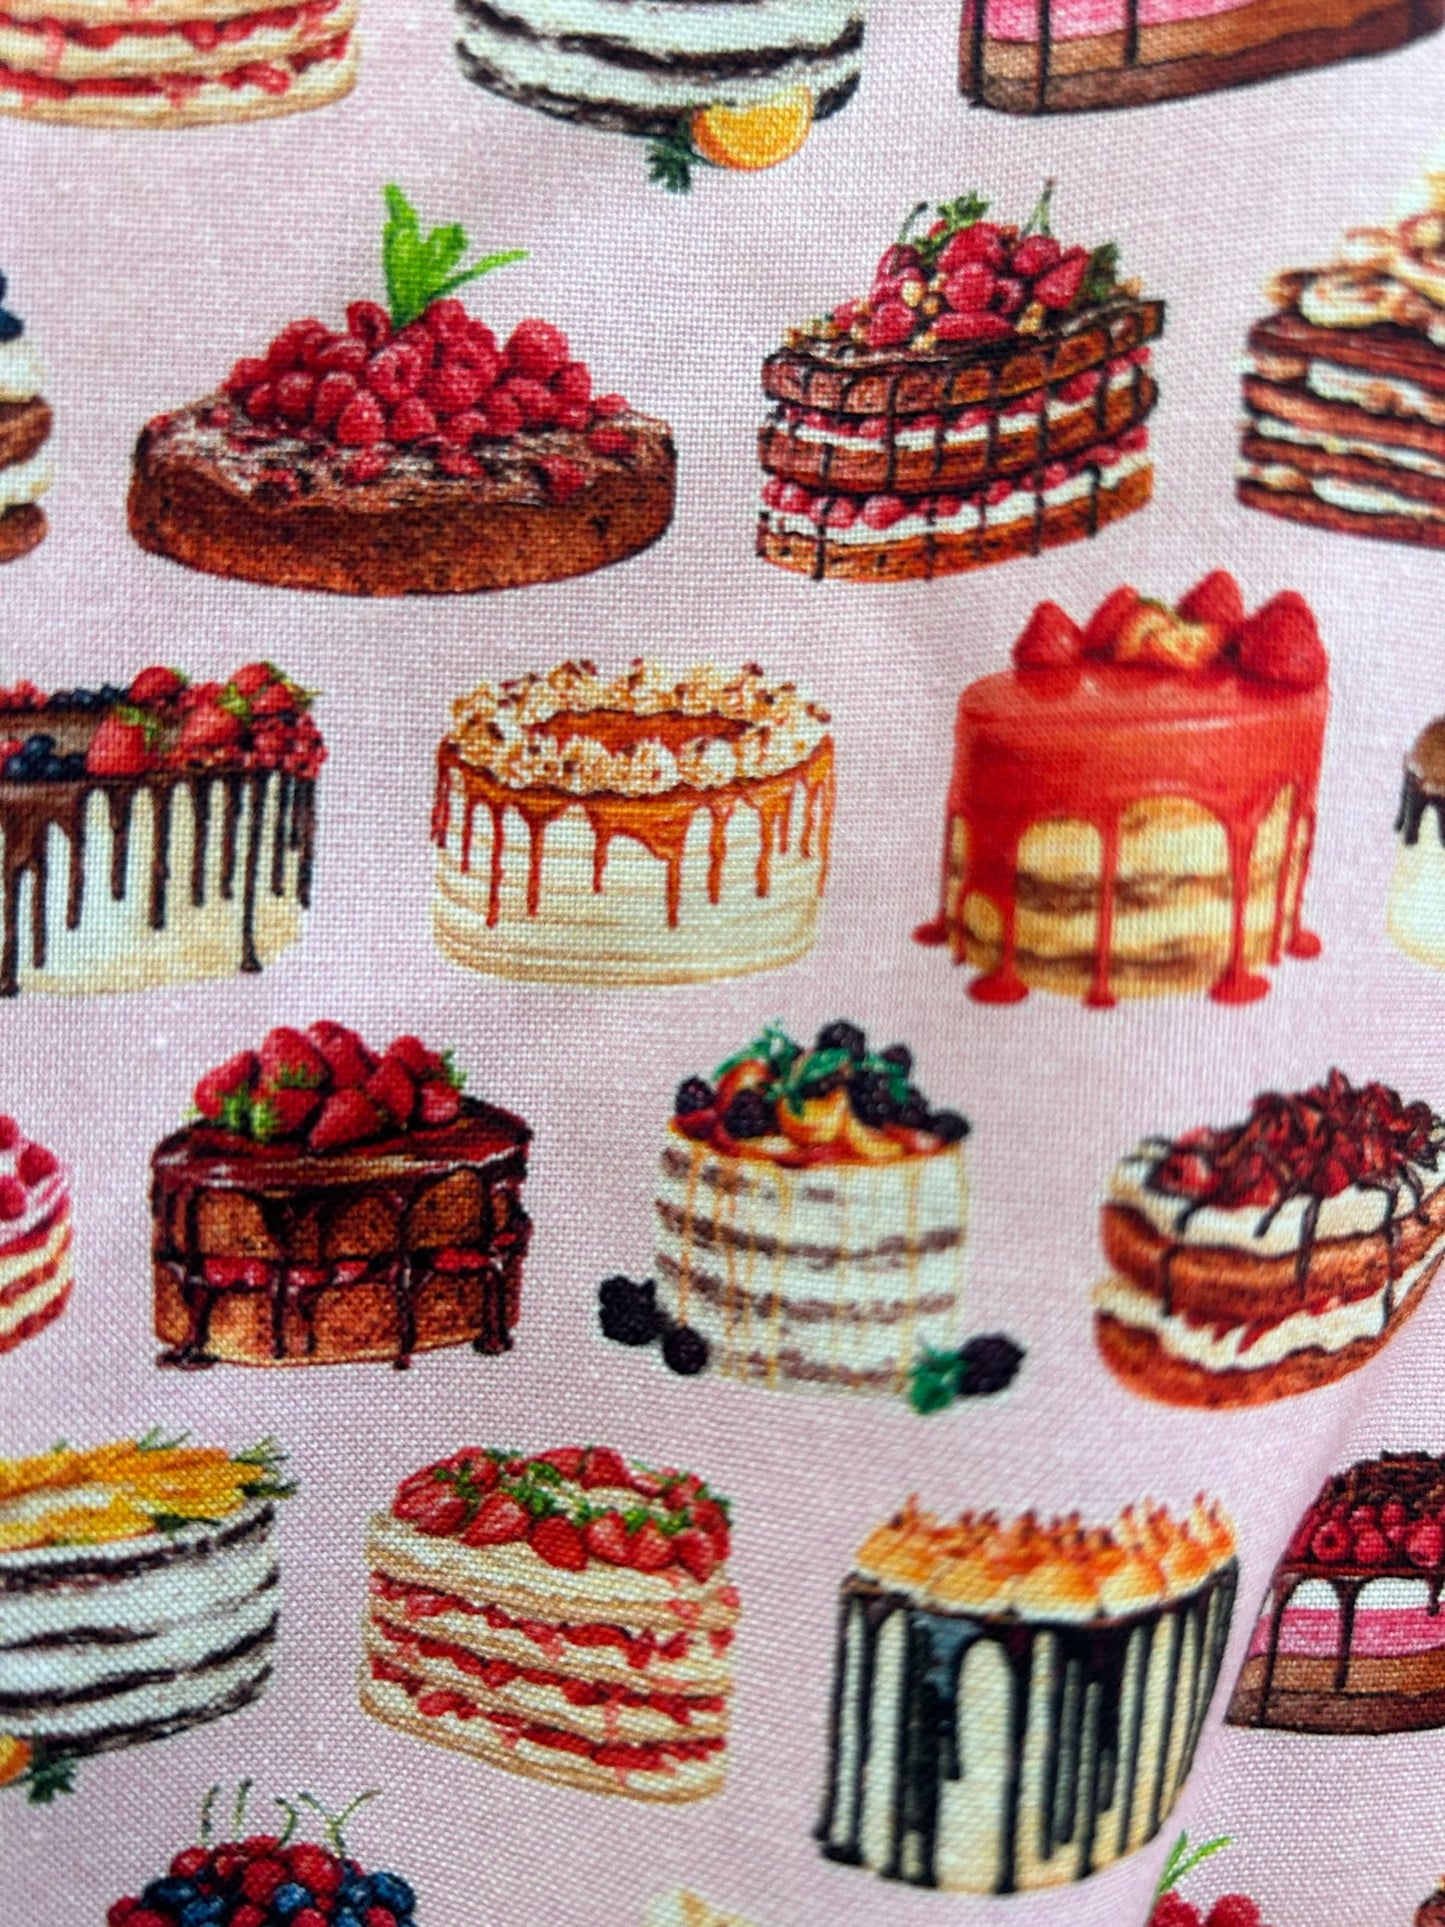 a close up of fabric showing cakes on pink background